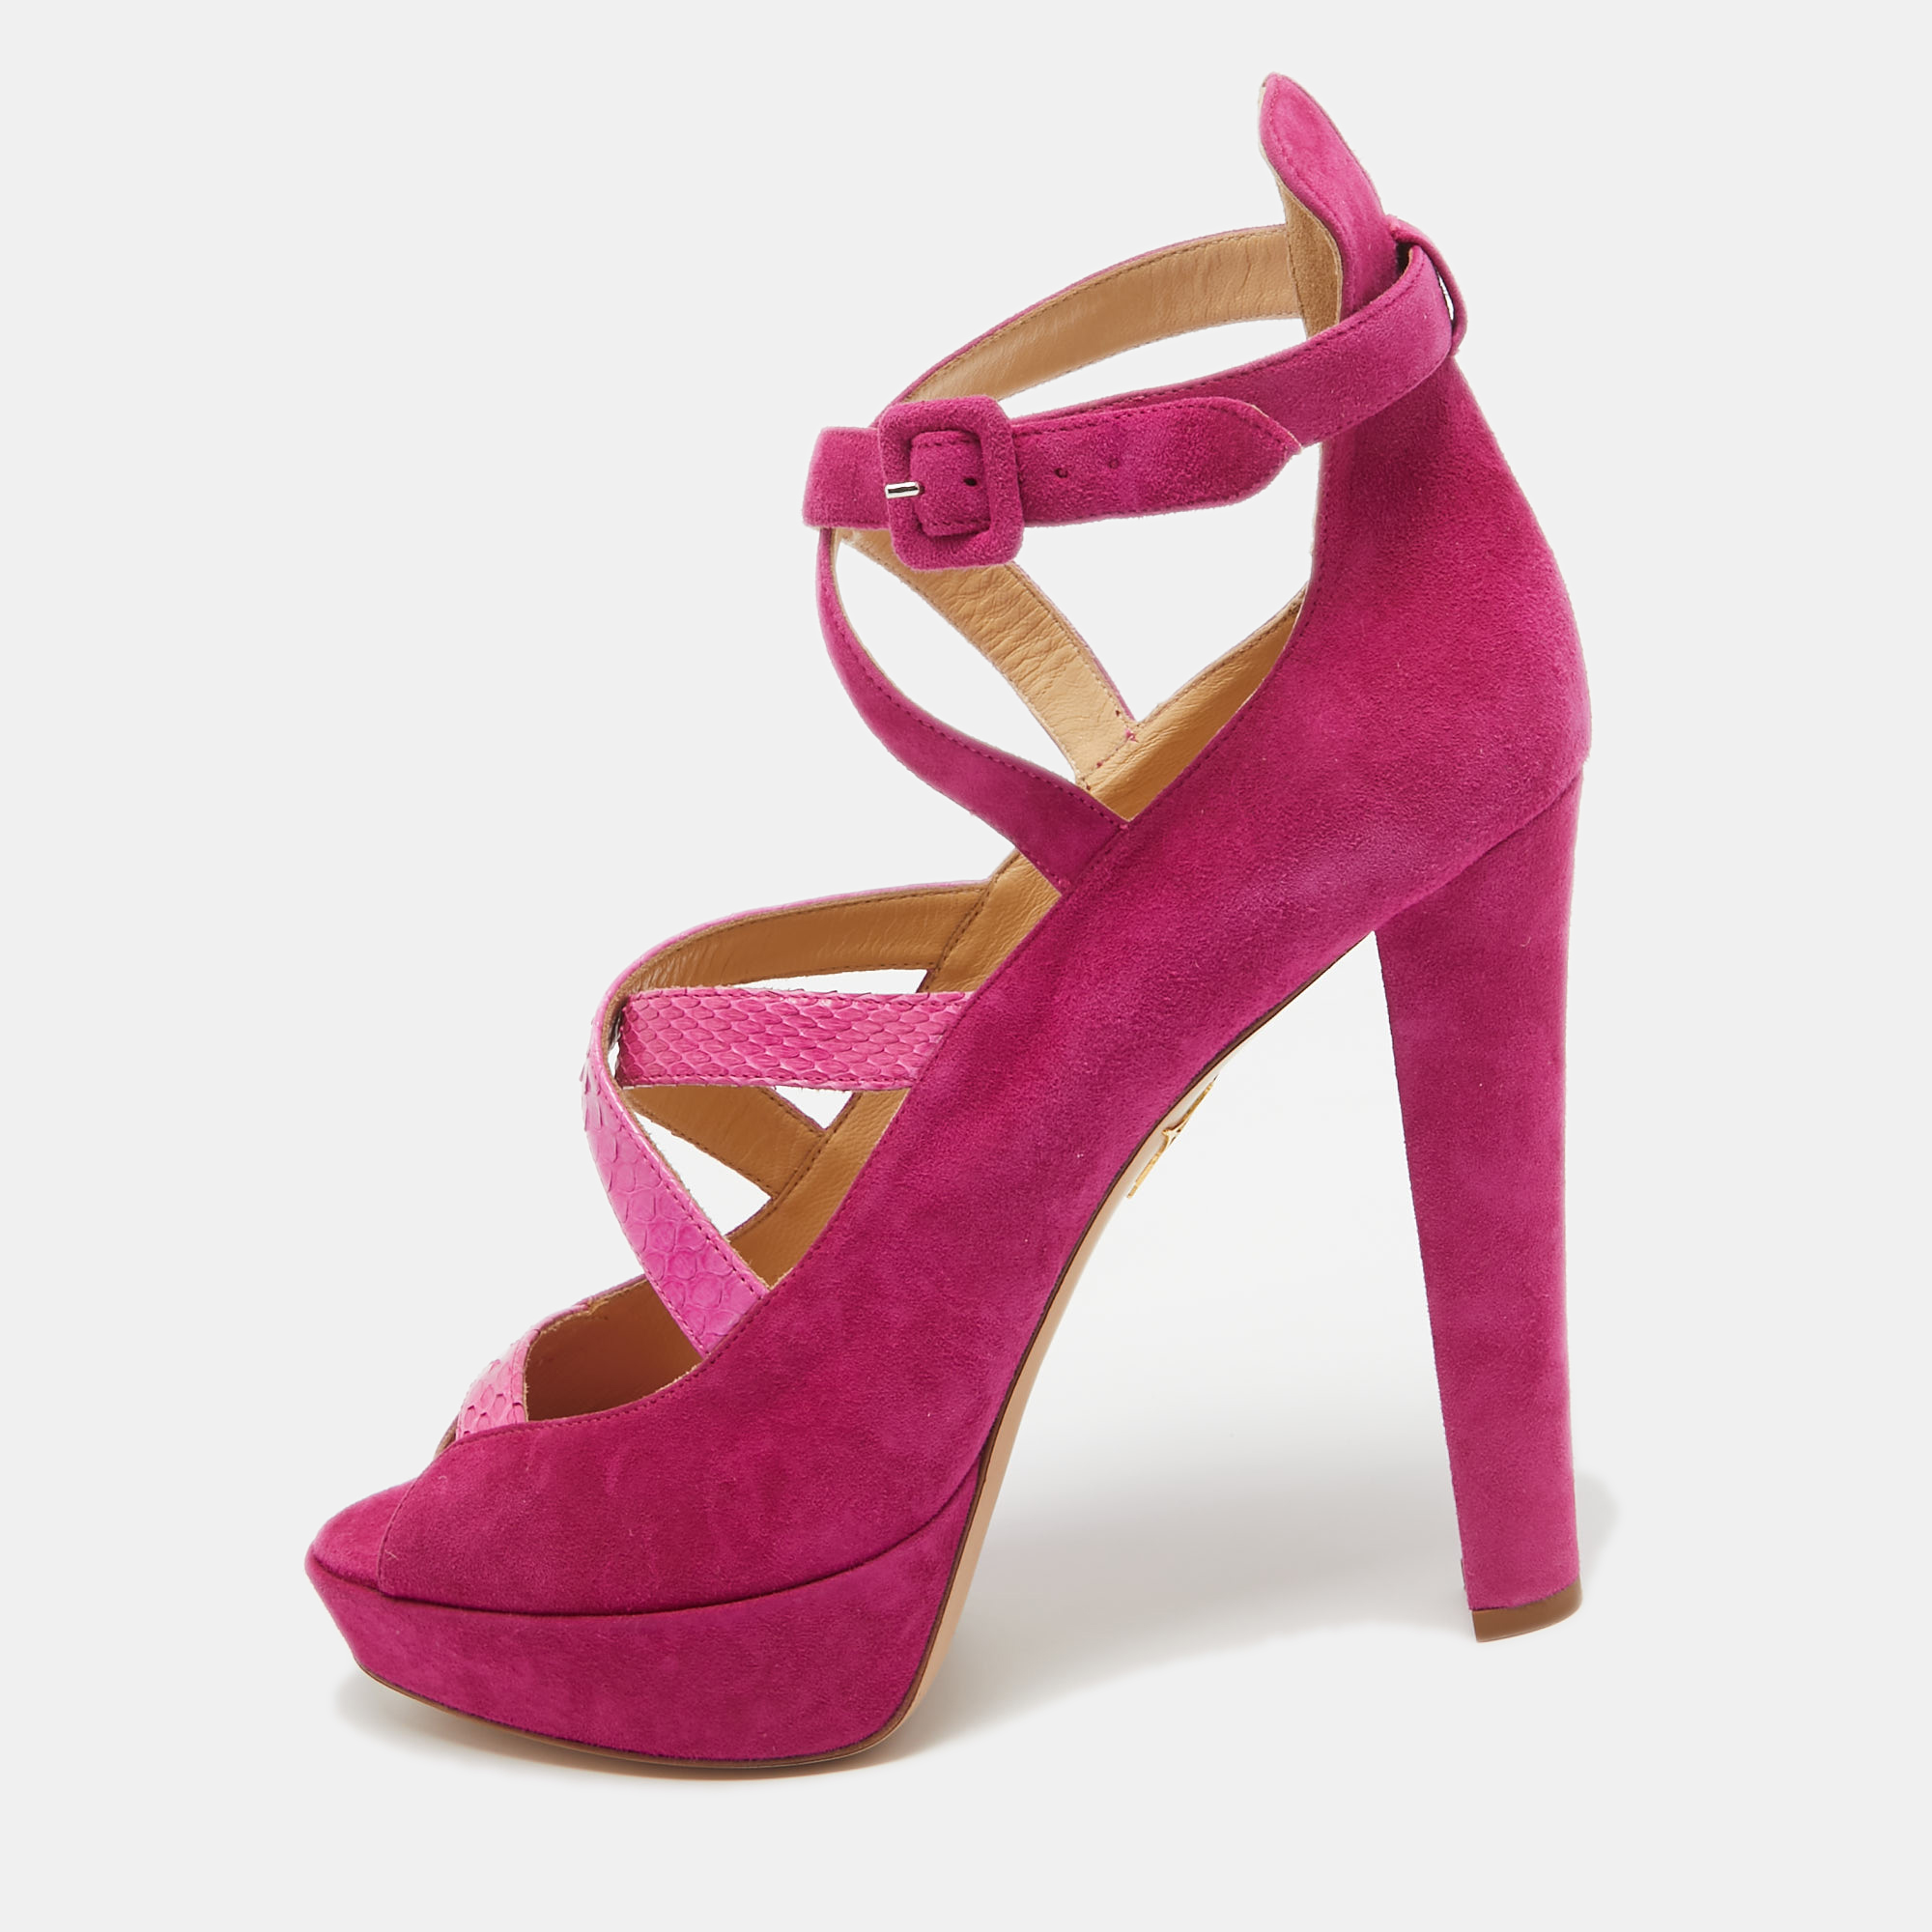 Charlotte olympia pink snakeskin and suede ankle strap pumps size 41